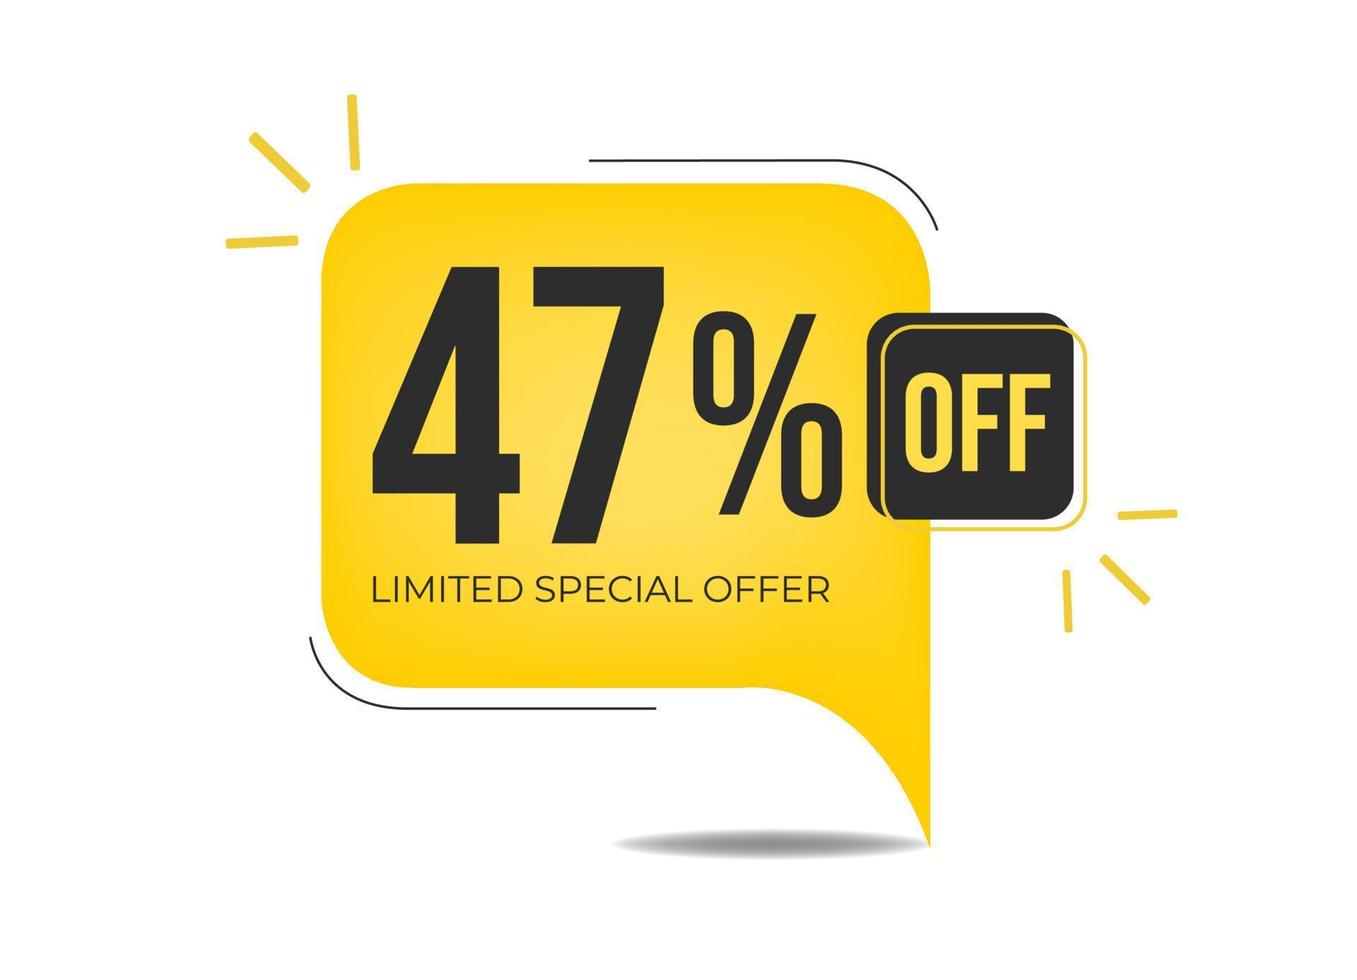 47 off limited special offer. Banner with forty-seven percent discount on a yellow square balloon. vector